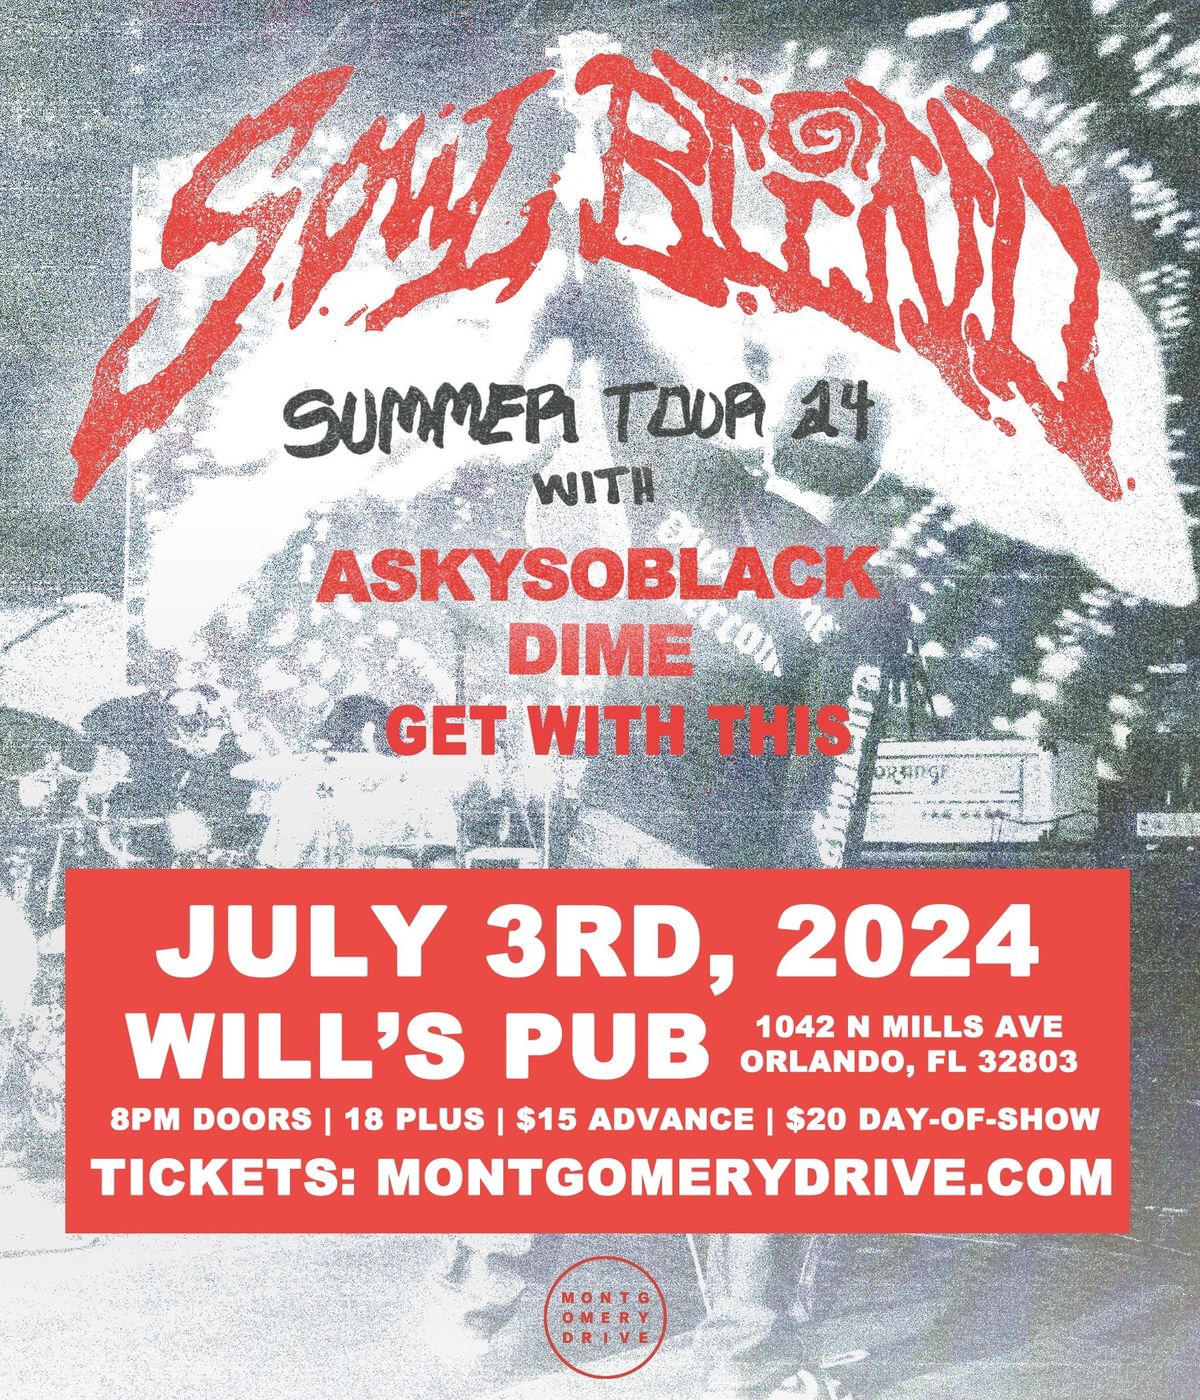 Soul Blind with ASkySoBlack, Dime, and Get With This at Will\u2019s Pub - Orlando, FL